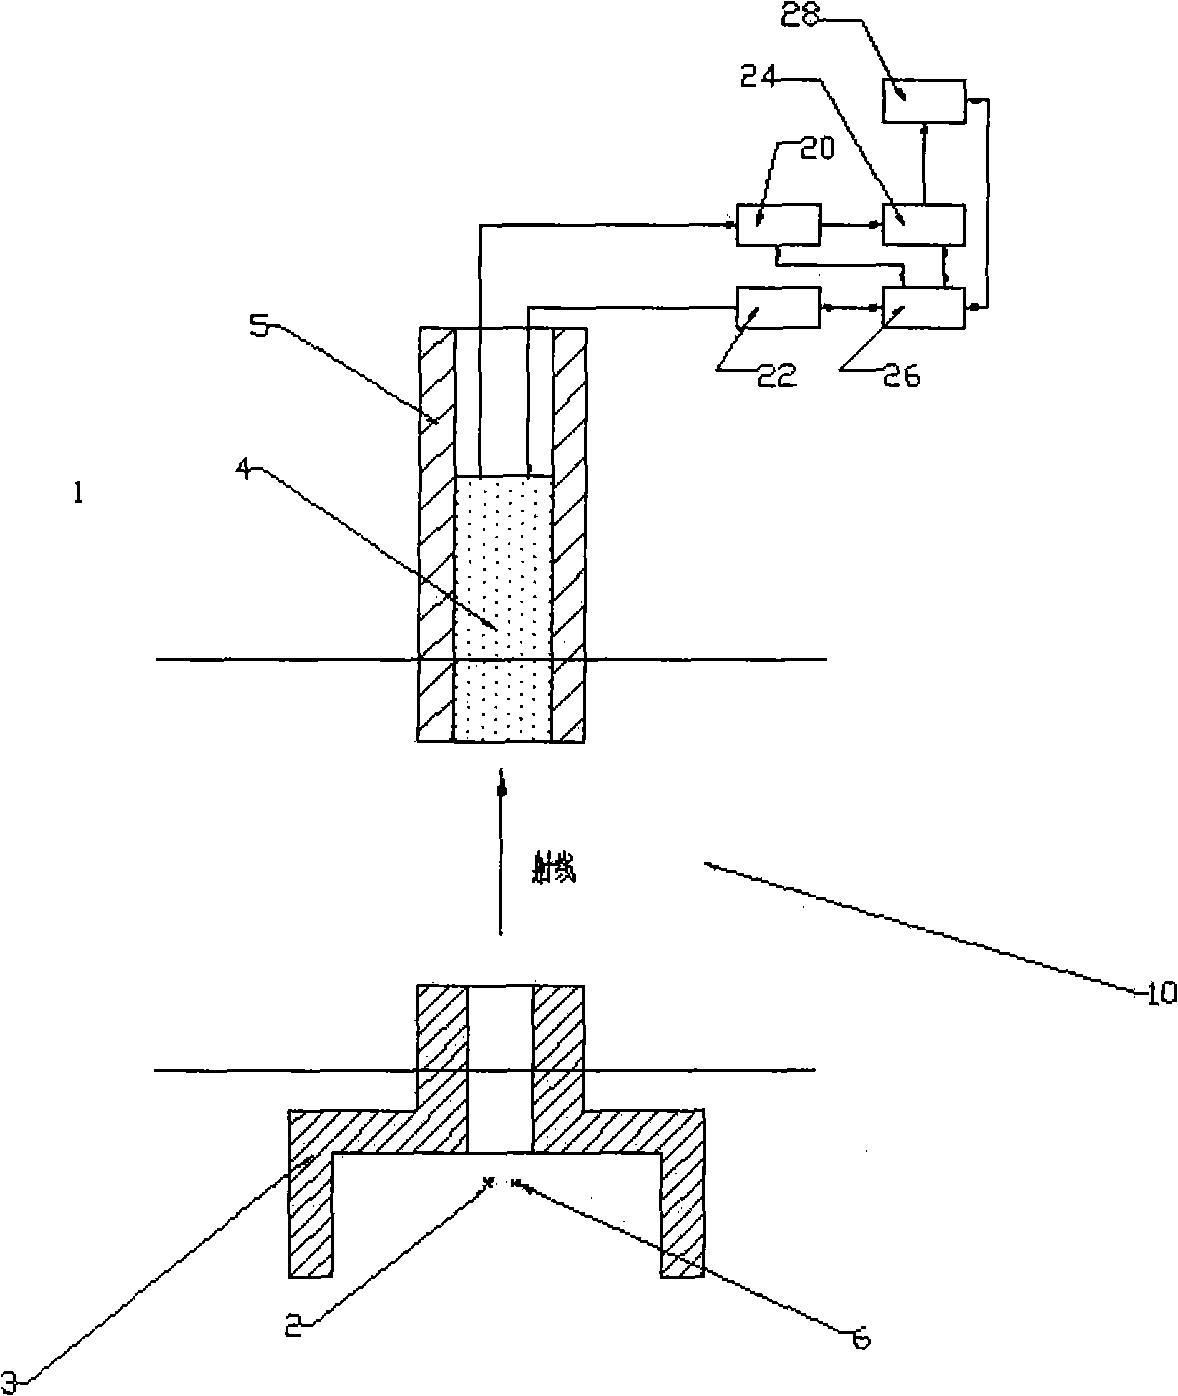 Crude oil gas fraction and moisture percentage dual energy gamma ray measurement method